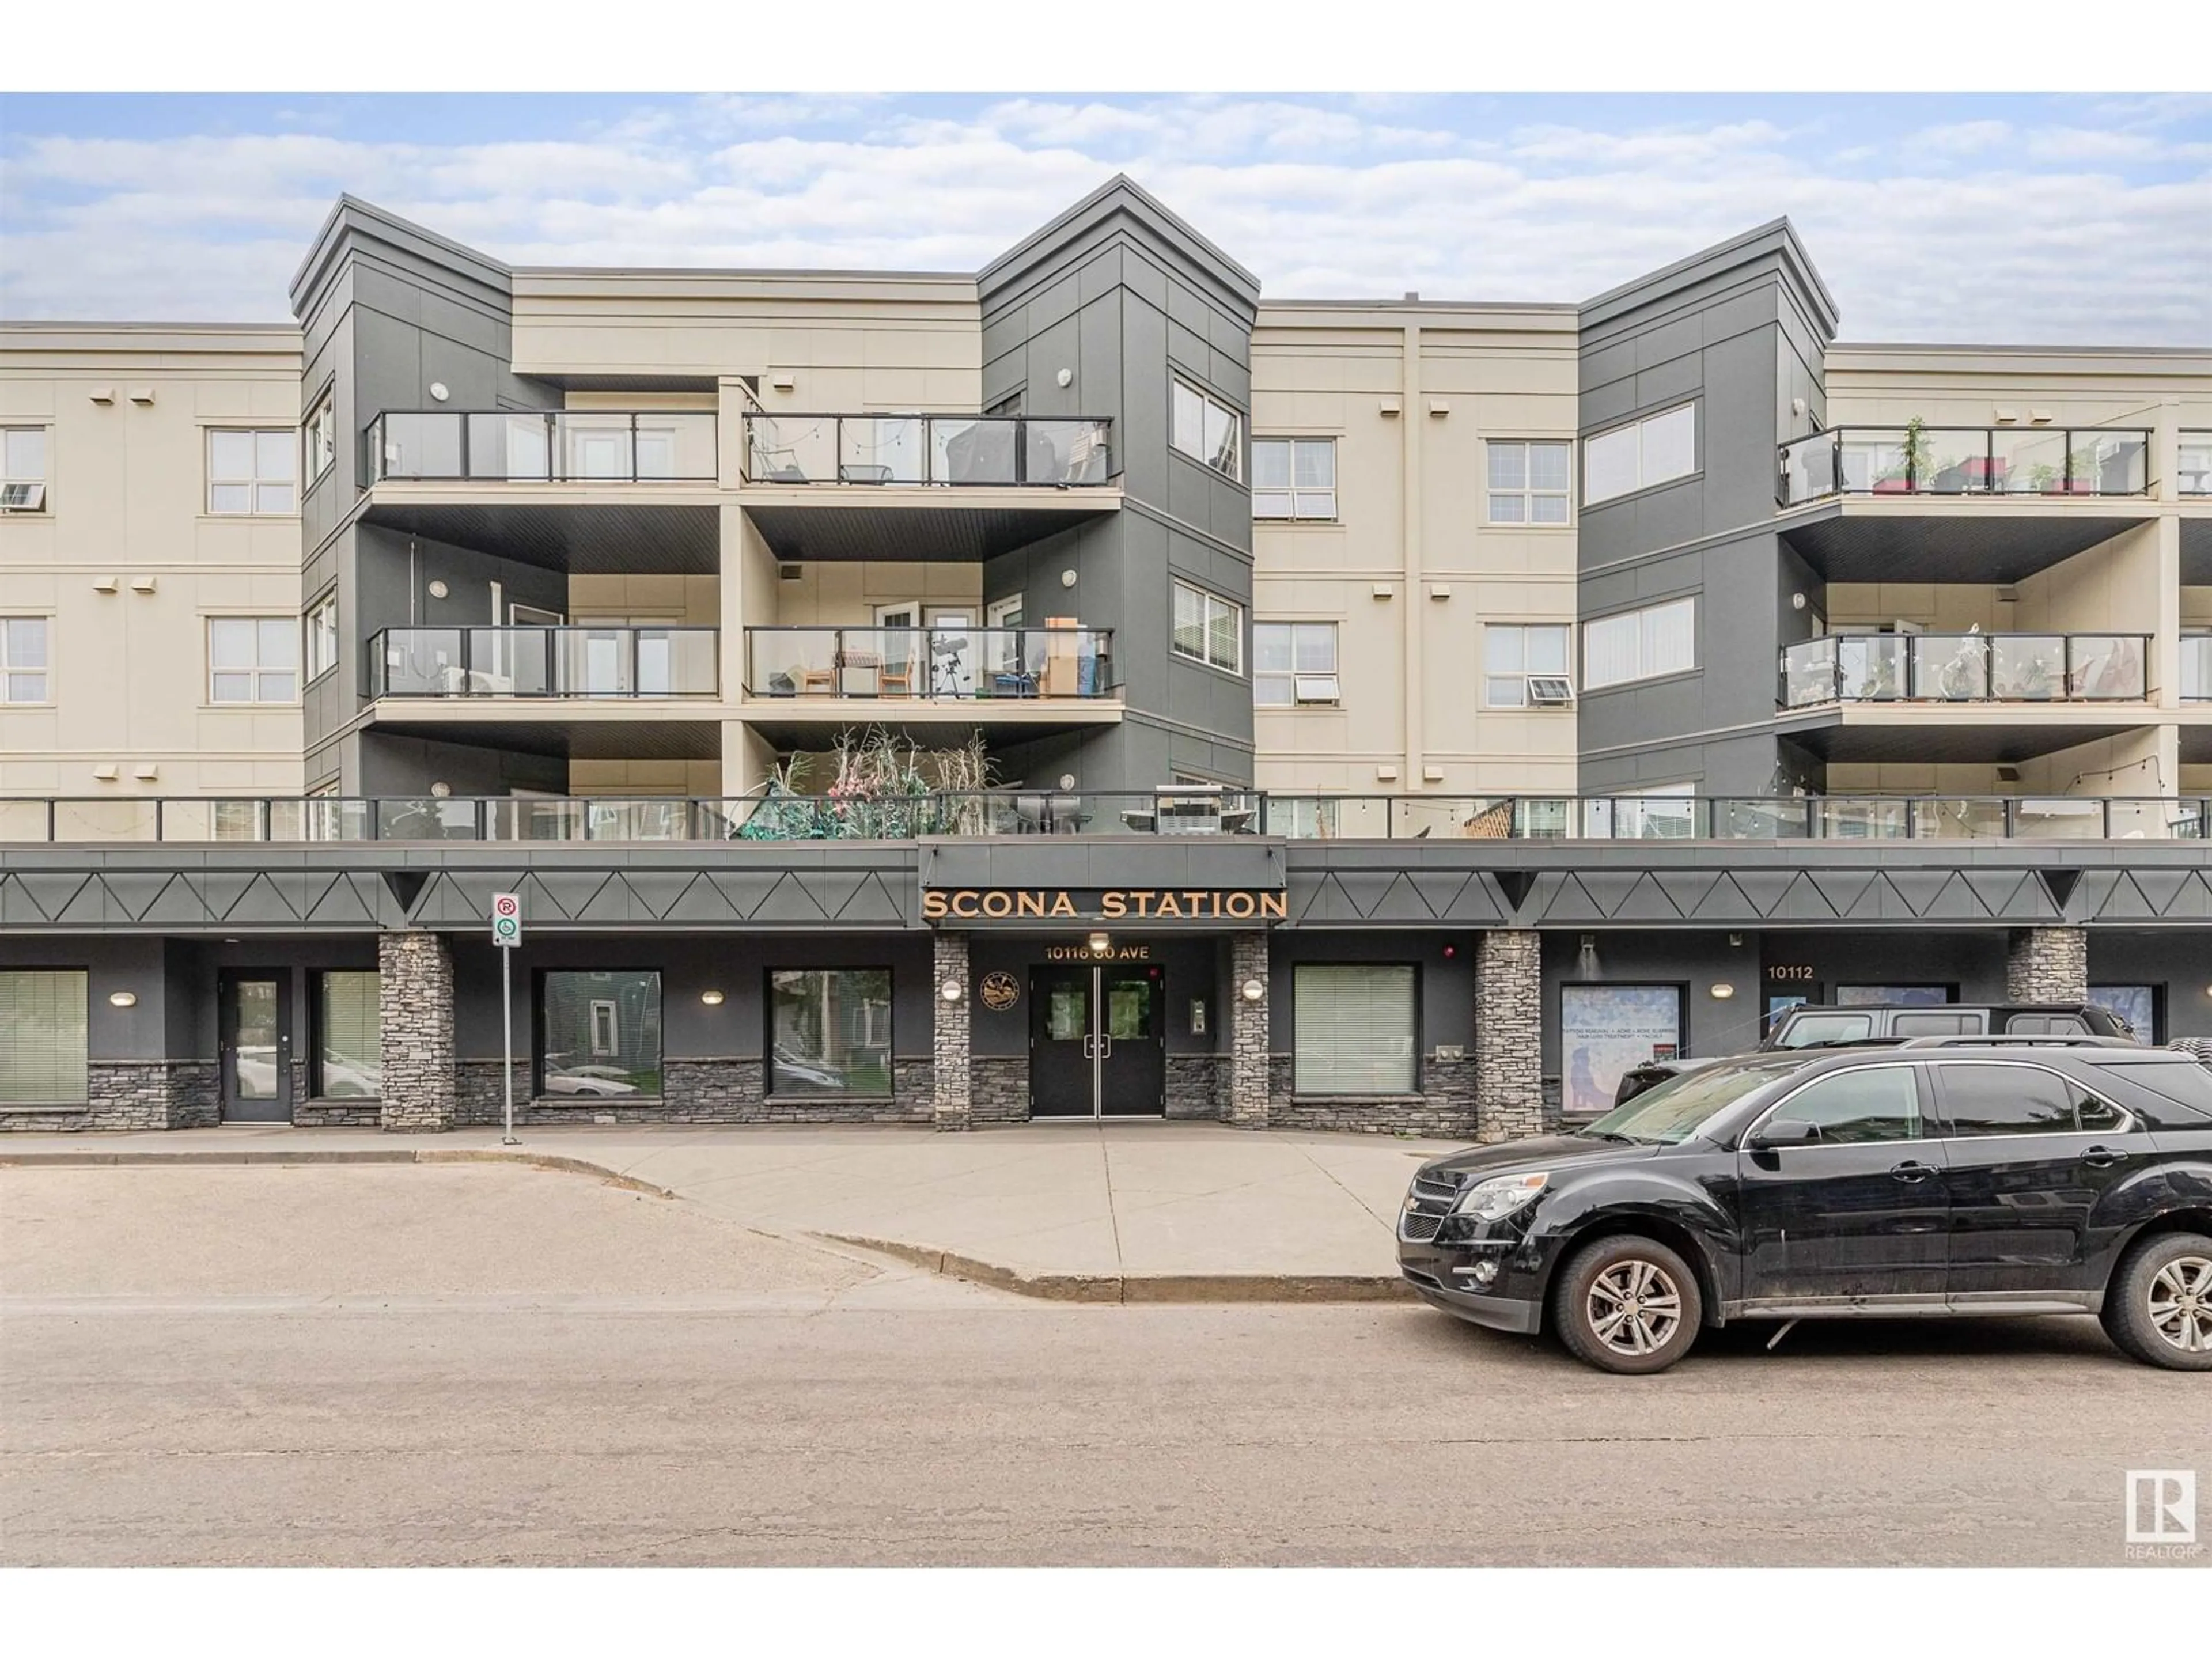 A pic from exterior of the house or condo for #410 10116 80 AV NW, Edmonton Alberta T6E6V7